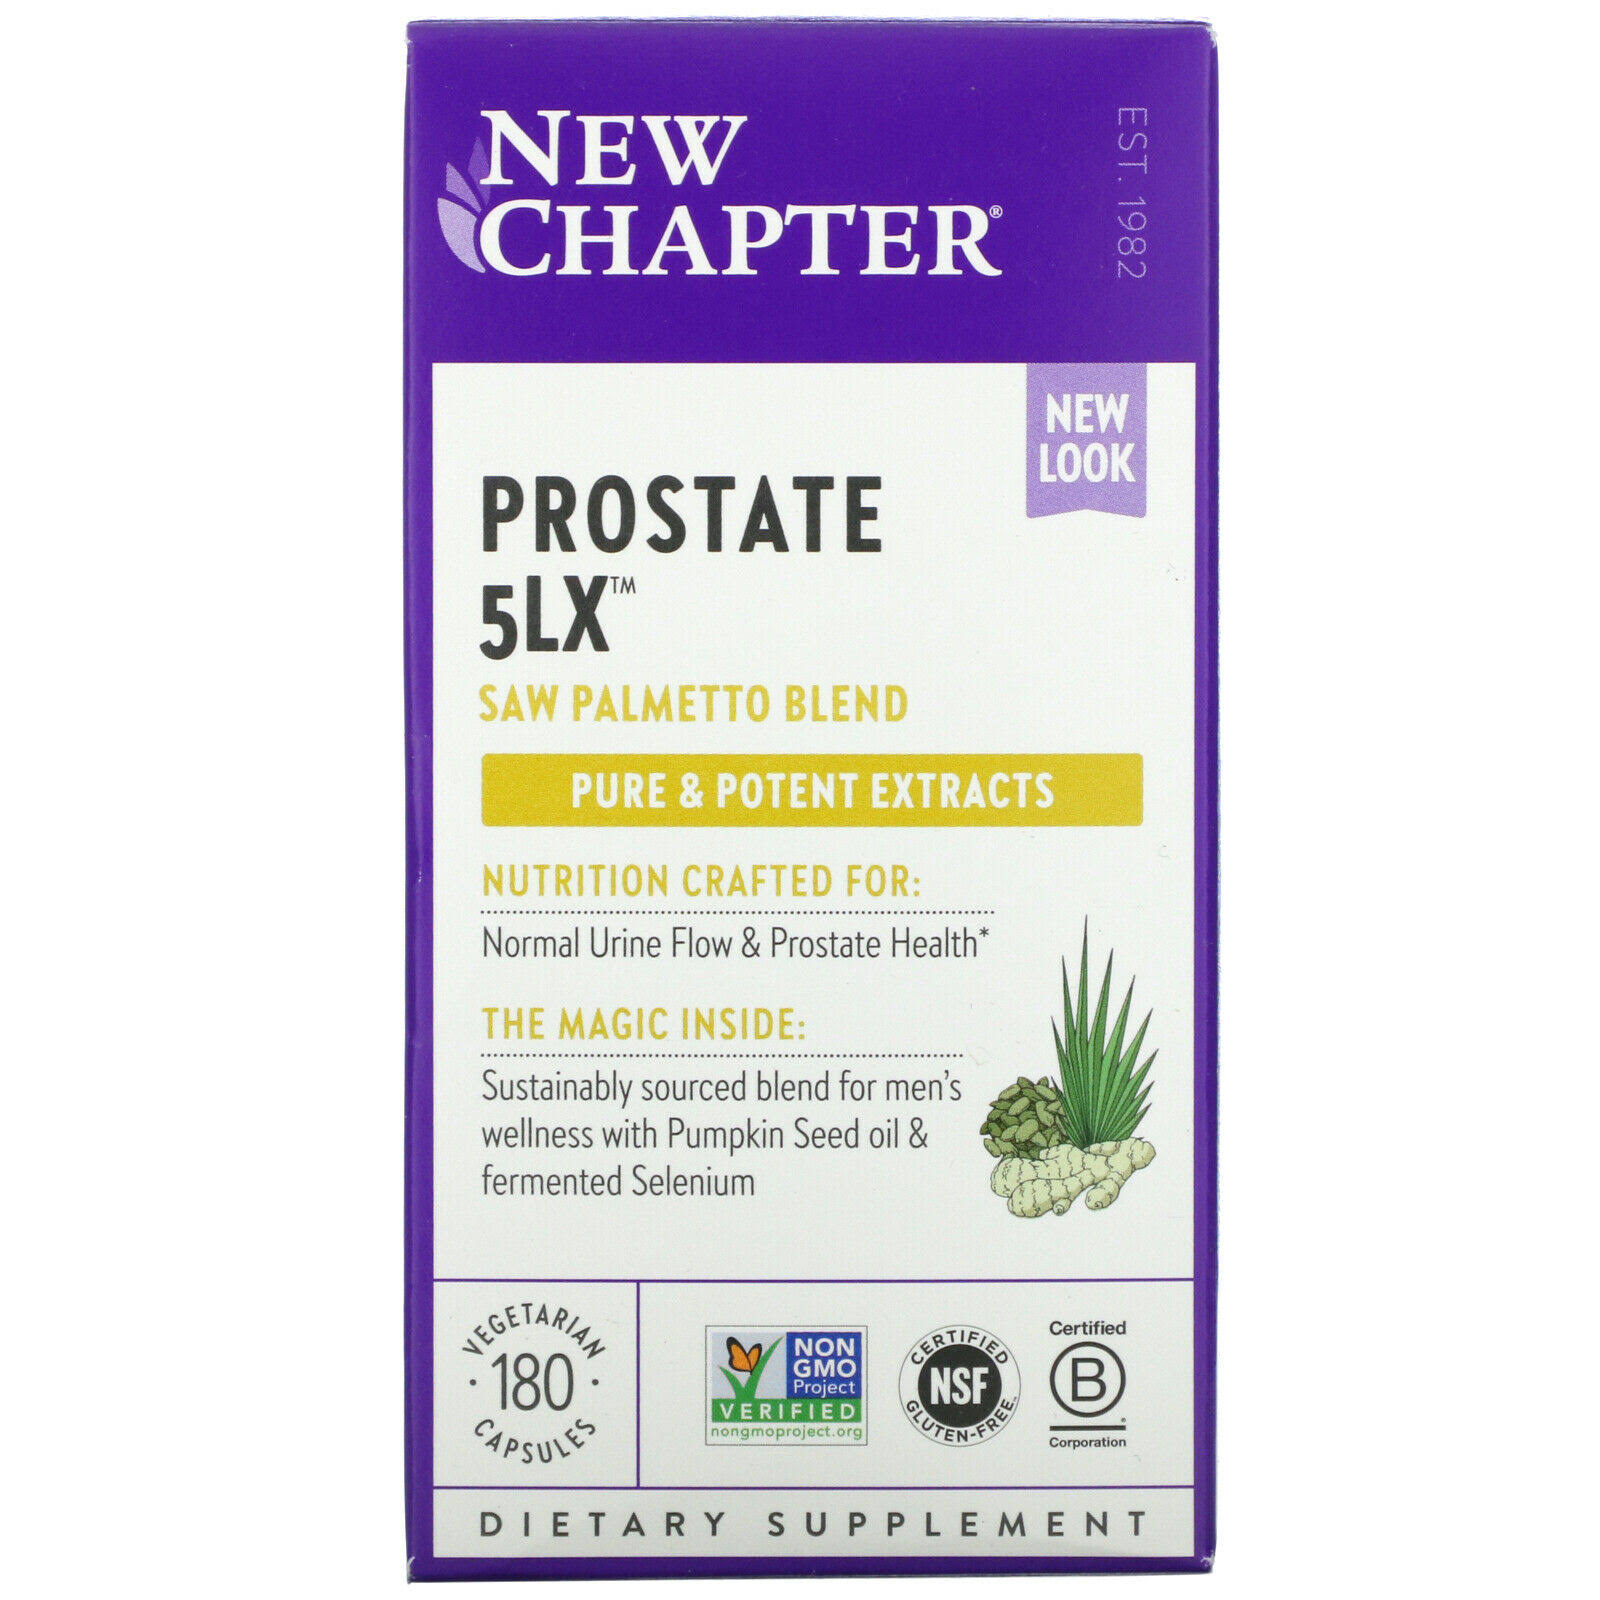 New Chapter Prostate 5lx Dietary Supplement - 180 Liquid Vcaps